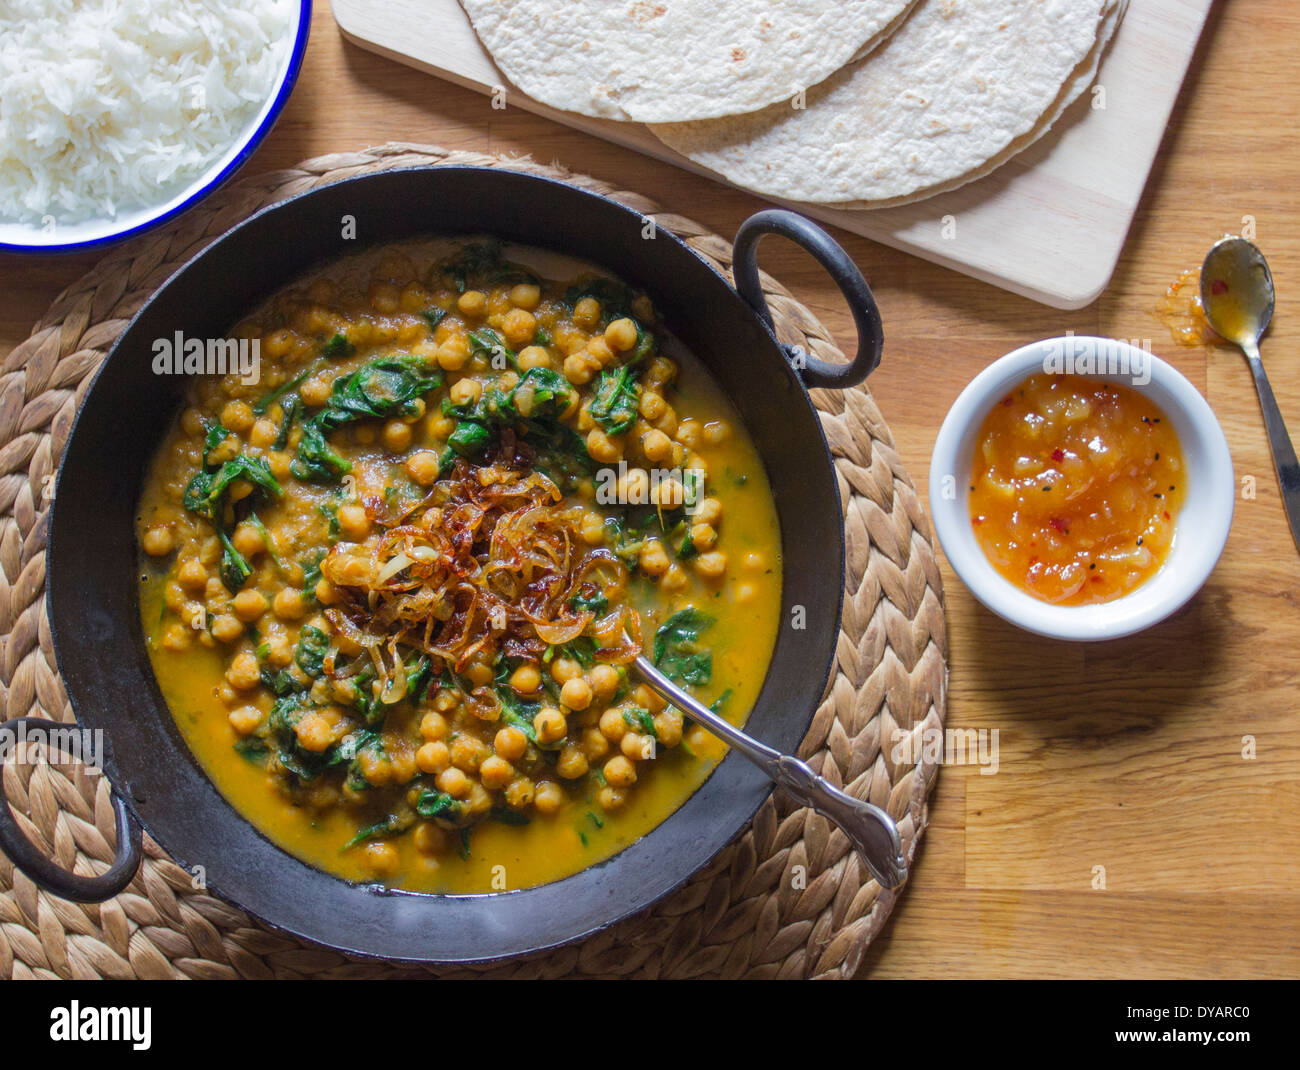 https://c8.alamy.com/comp/DYARC0/chickpea-and-spinach-curry-with-caramelised-onions-rice-chapatis-and-DYARC0.jpg